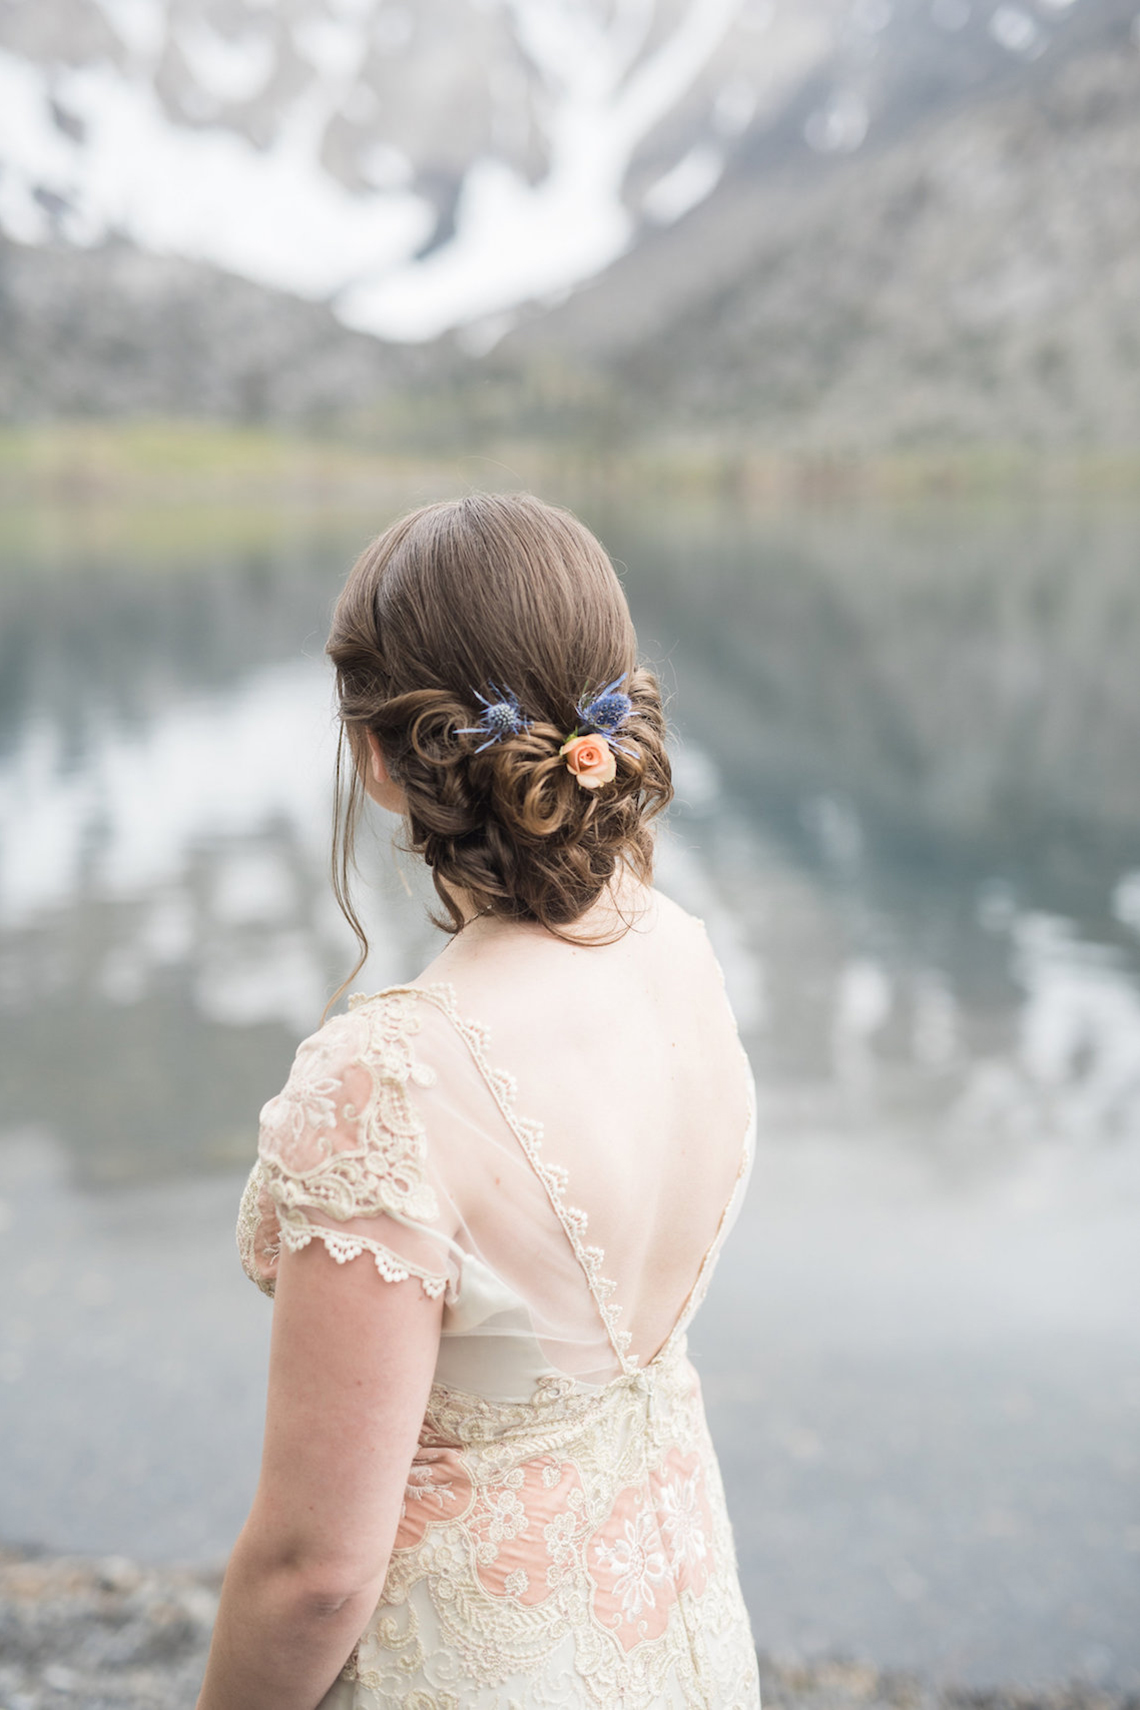 Snowy Mountain Wedding With A Pink & White Vintage Inspired Gown | Victoria Johansson 44